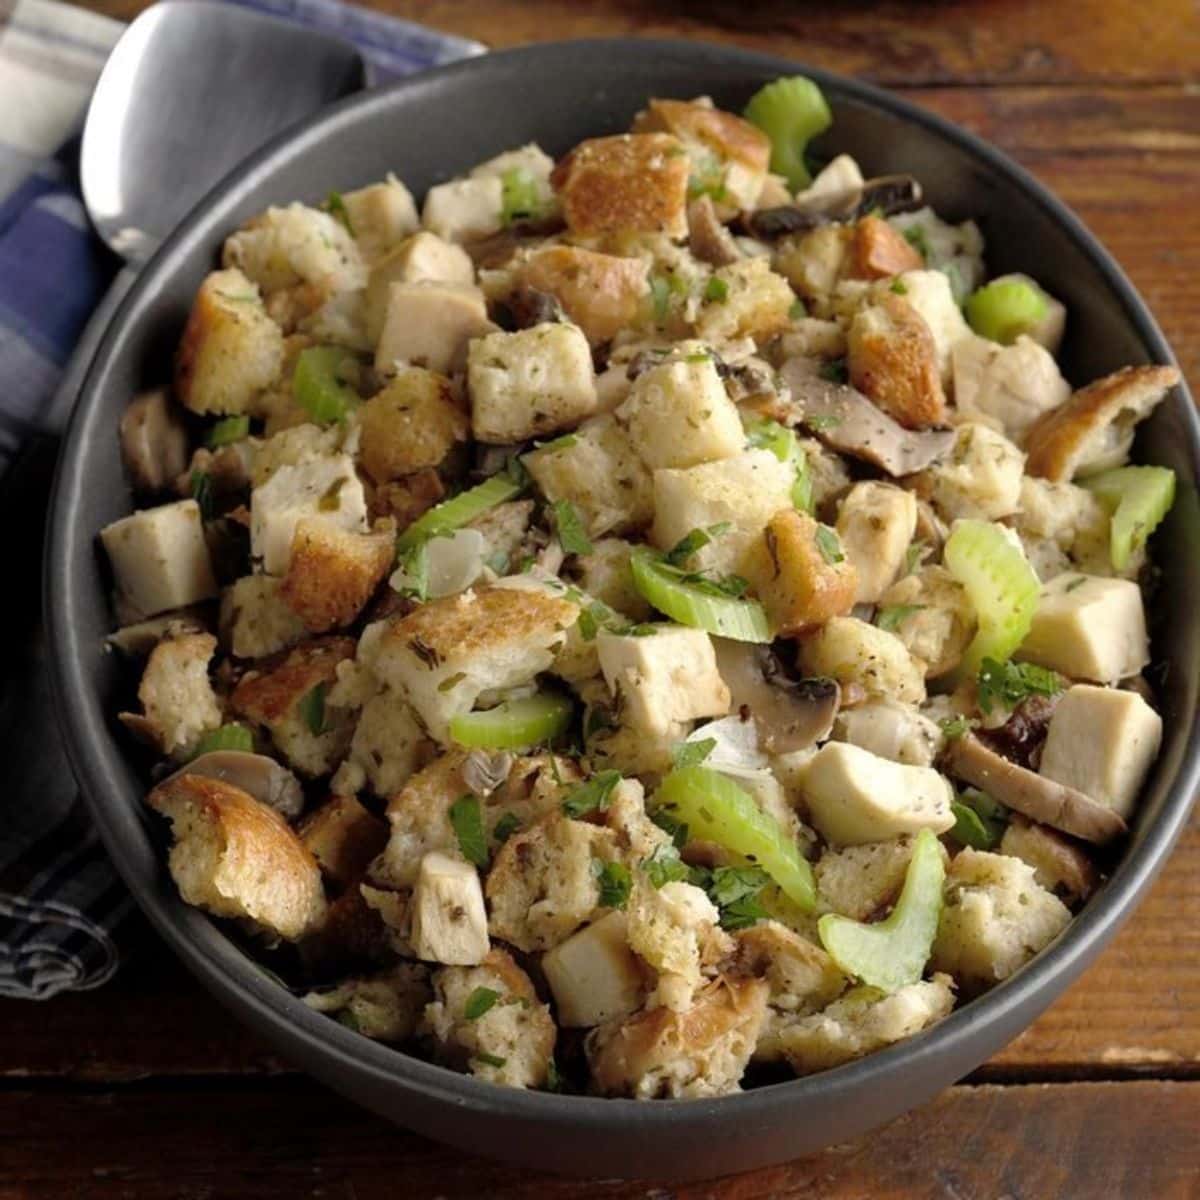 Tasty chicken and stuffing in a black pot.